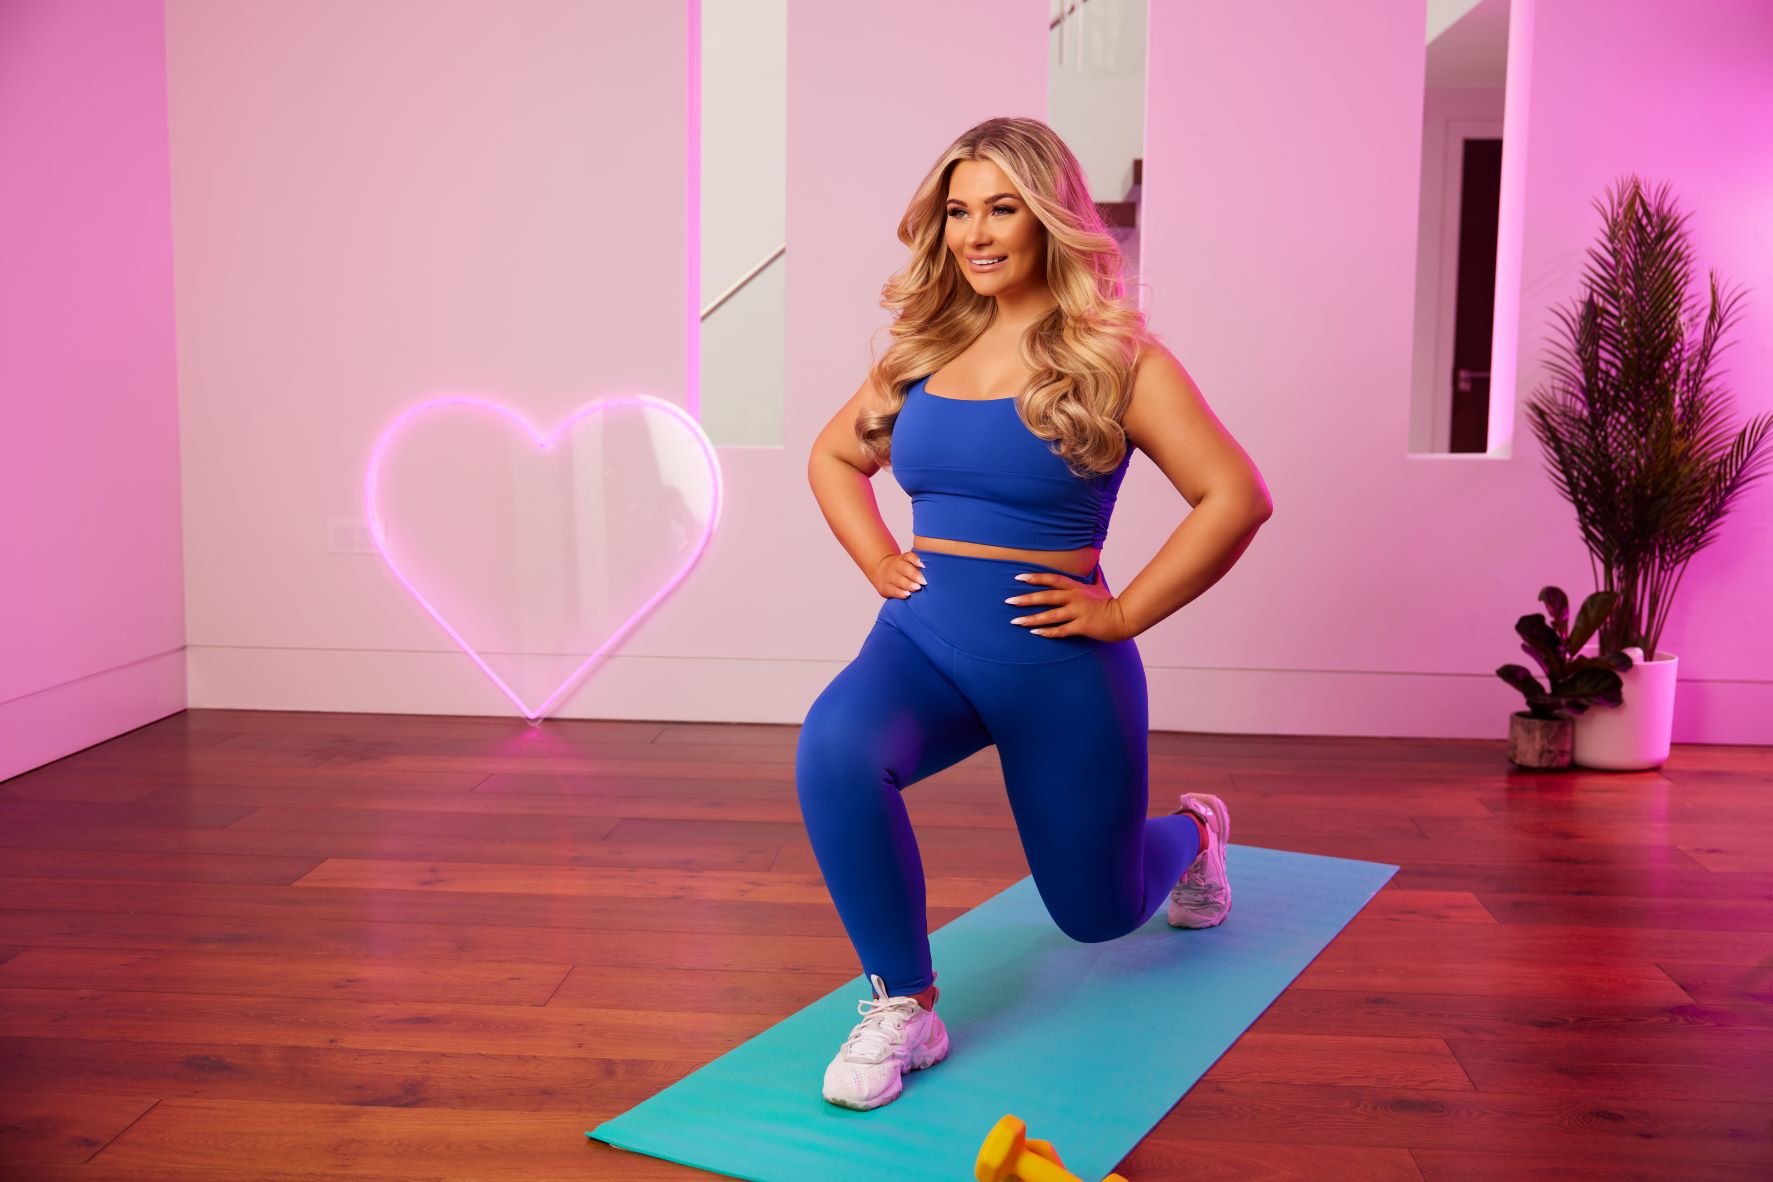 Shaughna Phillips doing exercise, wearing a blue outfit.